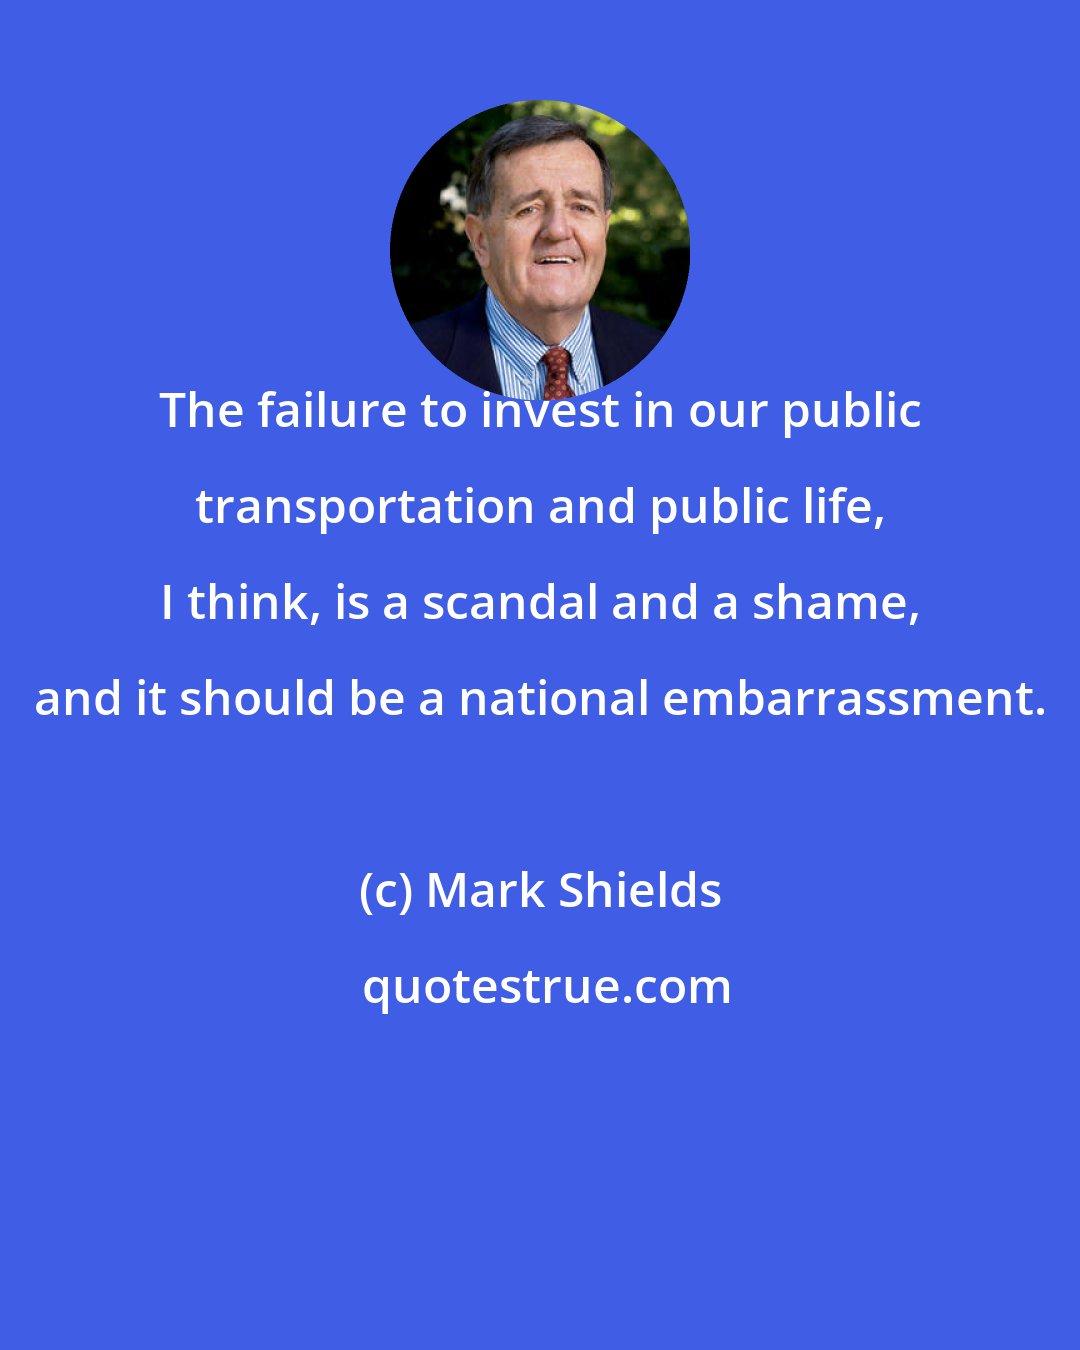 Mark Shields: The failure to invest in our public transportation and public life, I think, is a scandal and a shame, and it should be a national embarrassment.